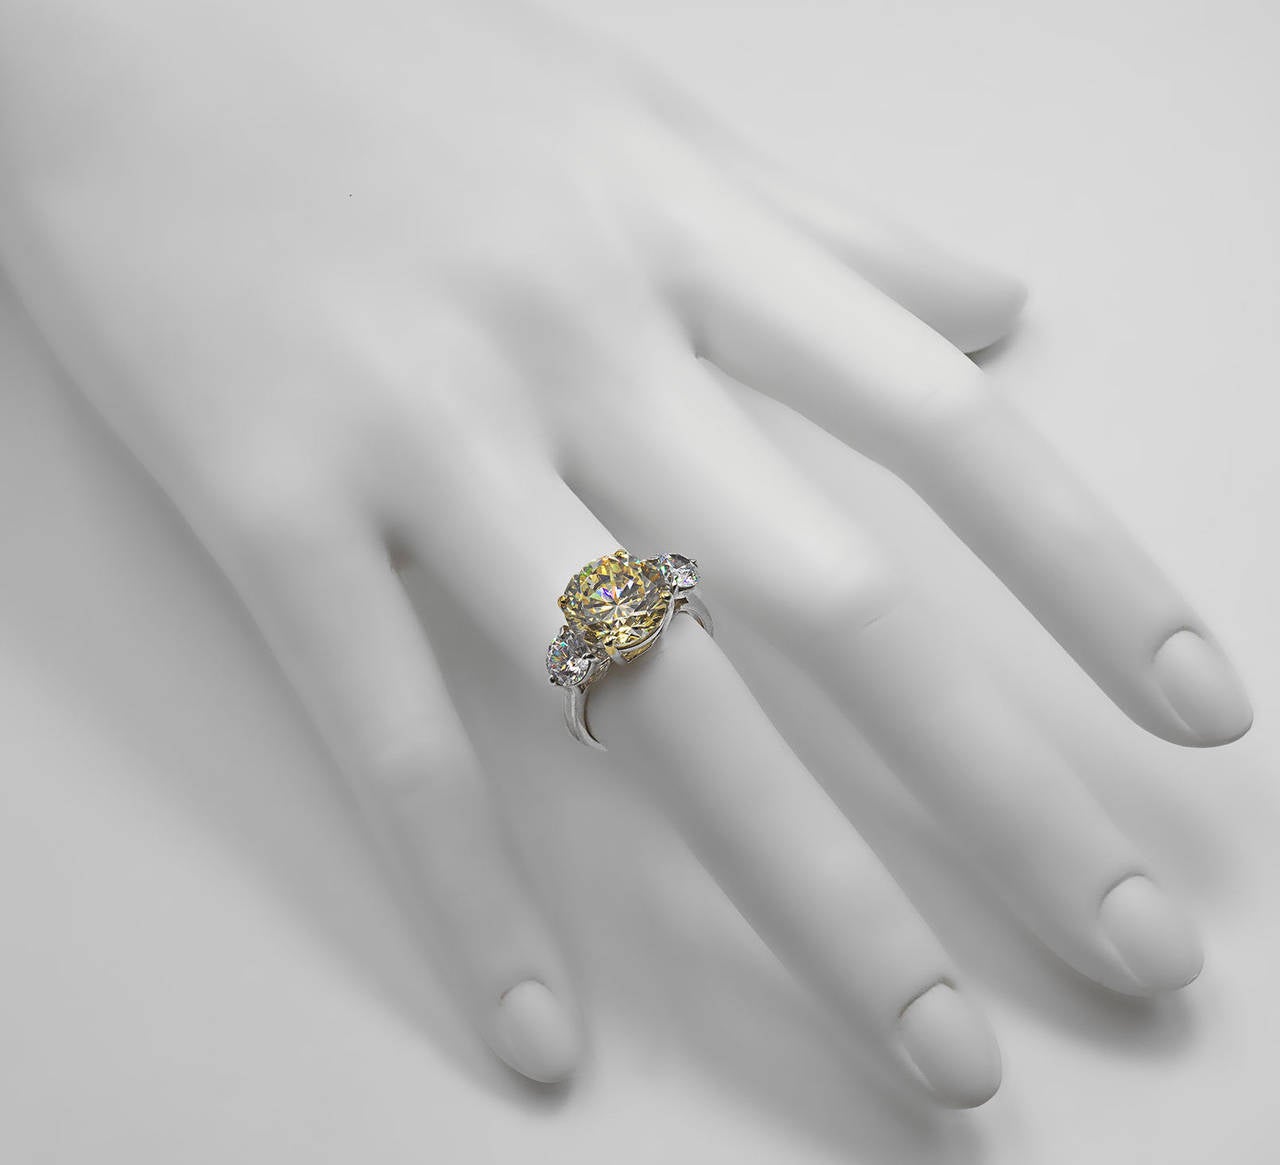 Wonderful brilliant faux canary and white diamond trinity ring made of hand cut cubic zircons and white gold. 

The centre stone is the equivalent size of a 4 carat canary diamond and the white side stones are 25 points of a carat each.

